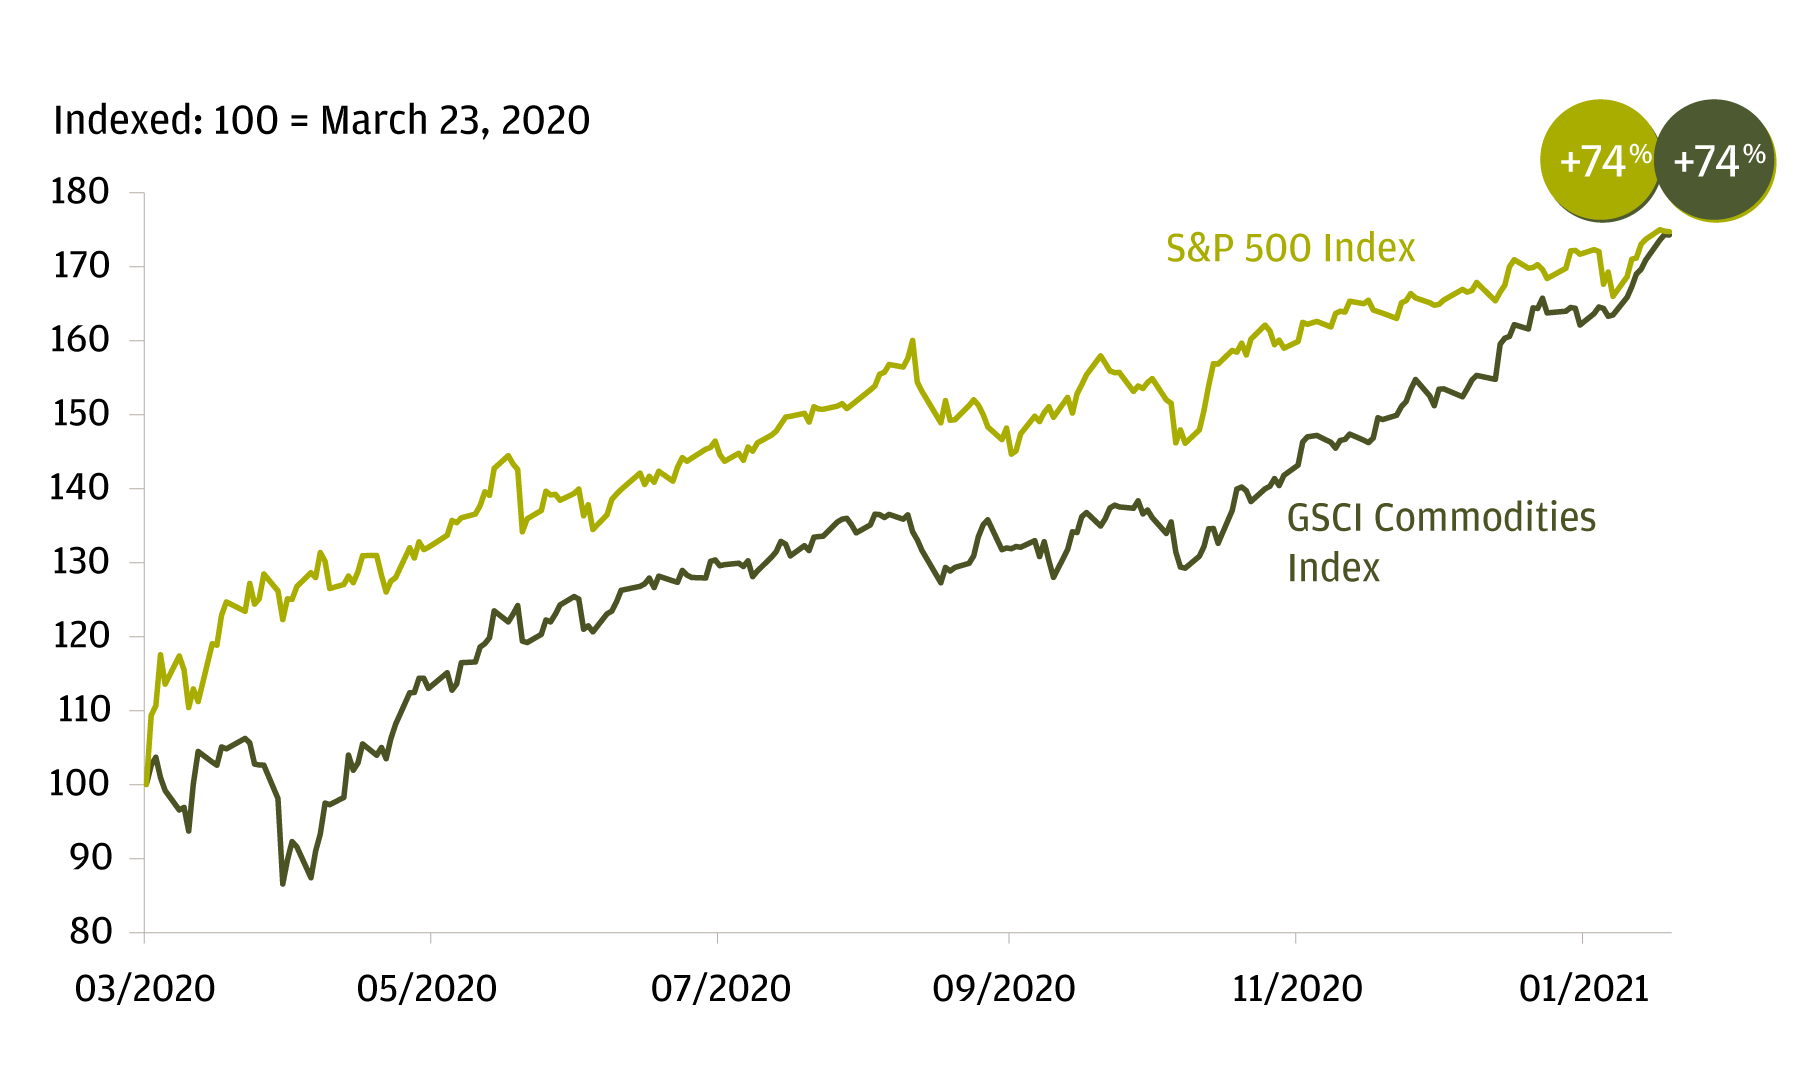 Chart shows performance of S&P 500 and GSCI Commodities Index normalized to March 23, 2020, which was the date of the S&P 500’s COVID crisis trough. From then until February 10, the S&P 500 and the GSCI Commodities Index have both rallied 74%.